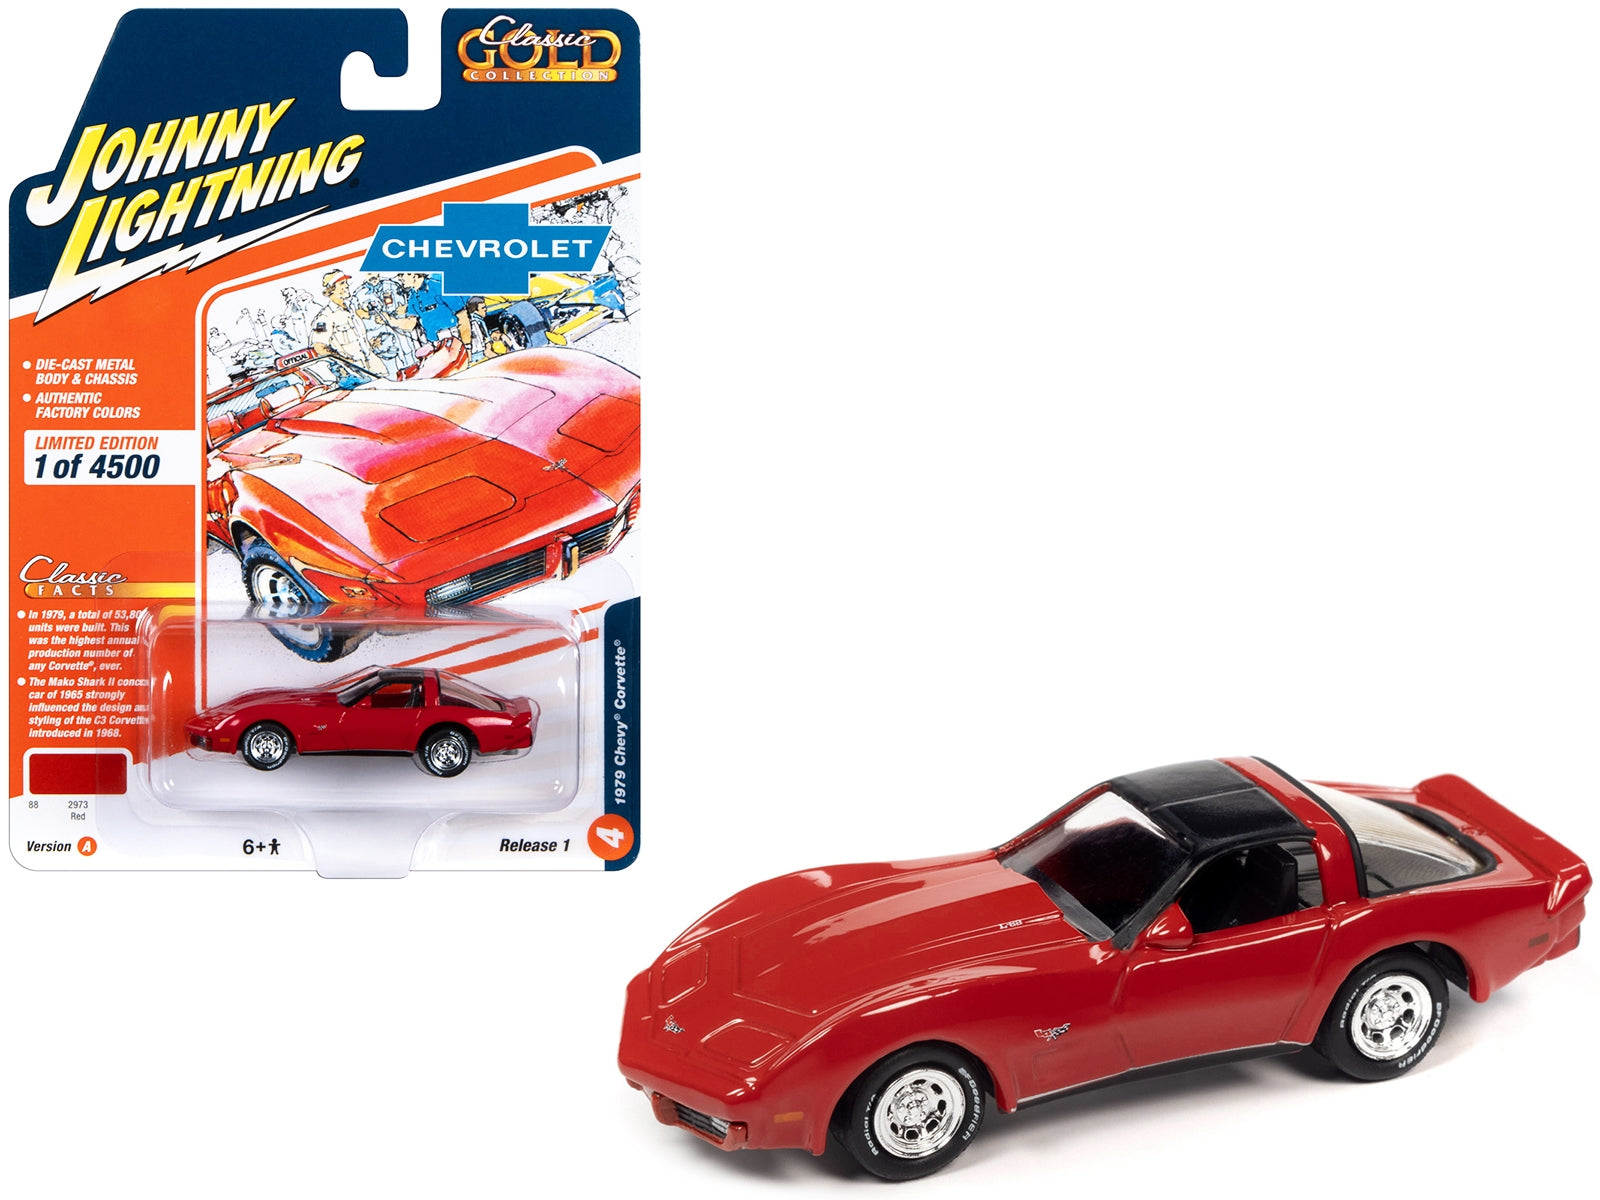 1979 Chevrolet Corvette Red with Black Top "Classic Gold Collection" 2023 Release 1 Limited Edition to 4500 pieces Worldwide 1/64 Diecast Model Car by Johnny Lightning